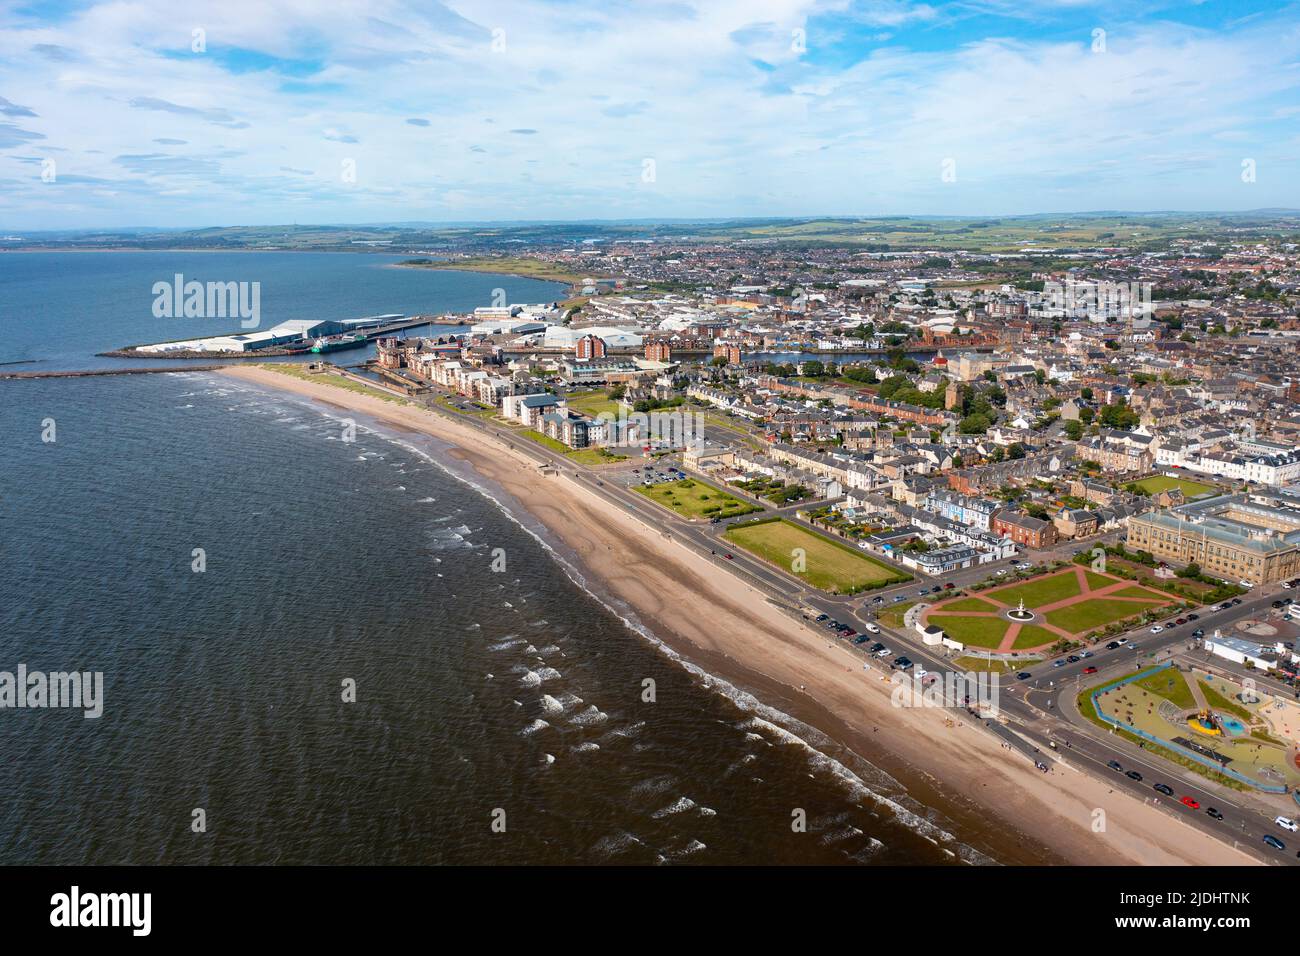 Aerial view from drone of town of Ayr on coast of Firth of Clyde in Ayrshire, Scotland, UK Stock Photo